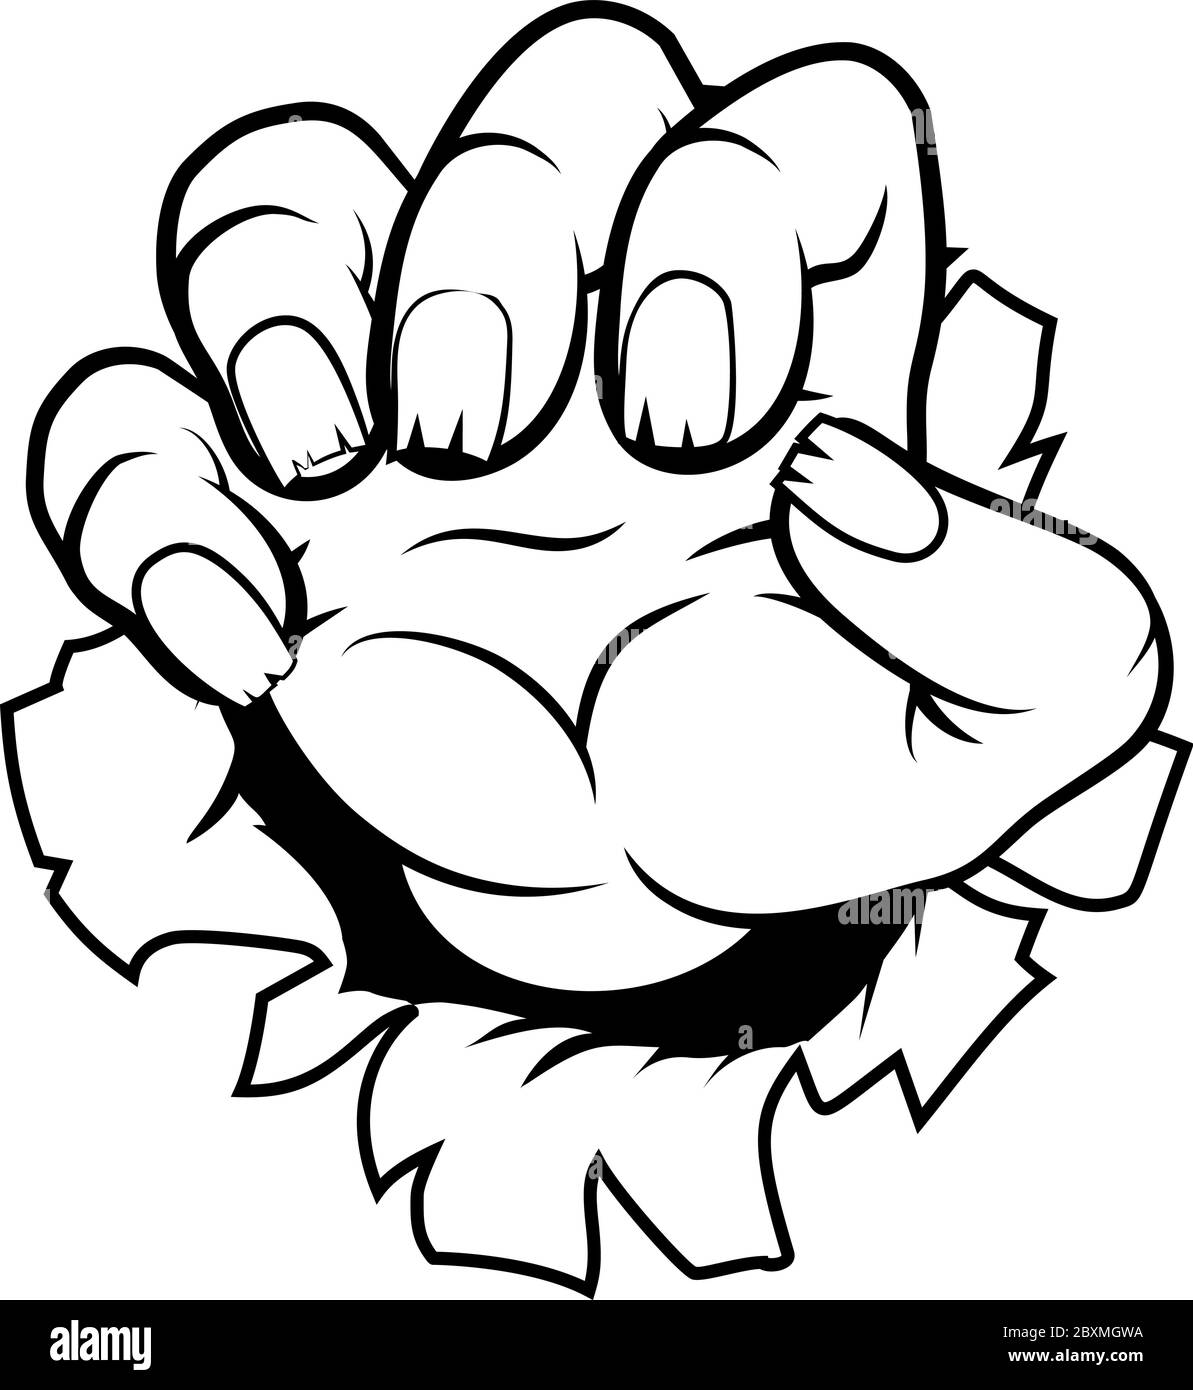 clawing hand drawing clipart